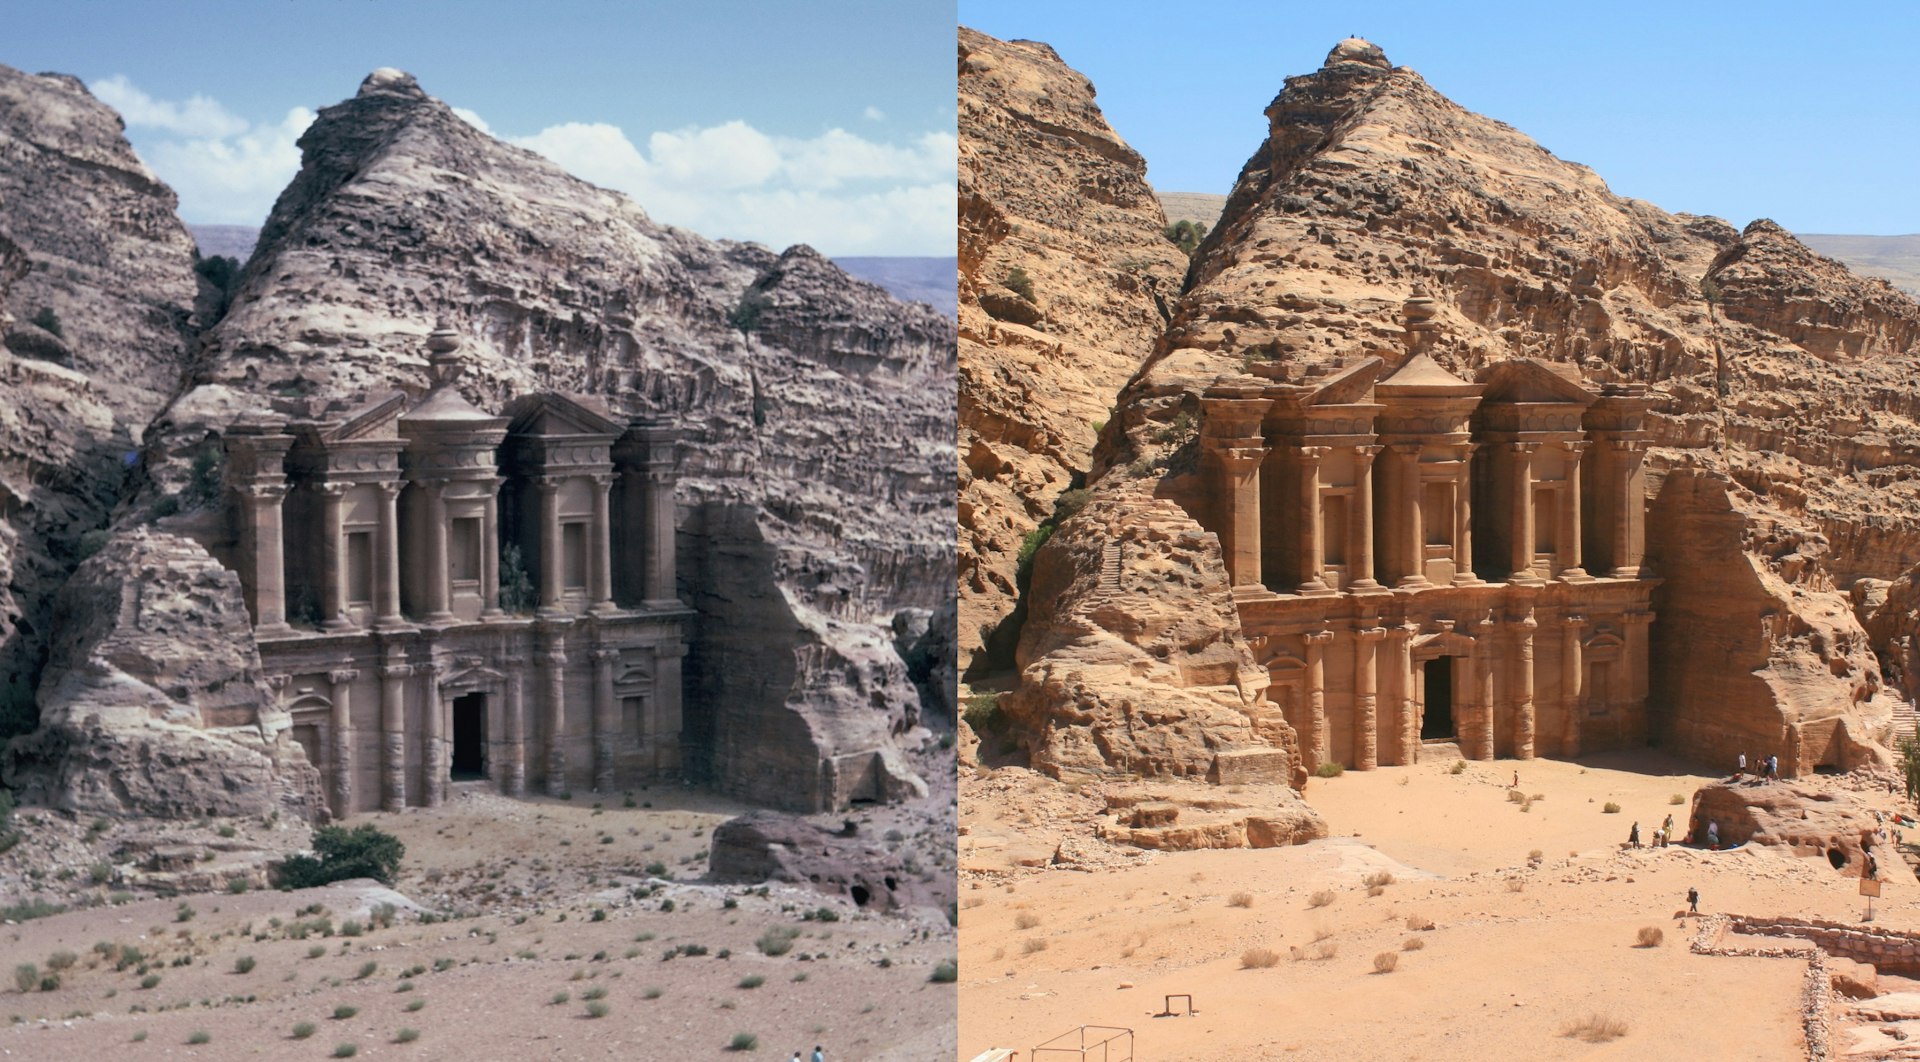 Two almost identical images of a huge rock-hewn facade in a large cliff face, one taken in 1972, the other 2019.